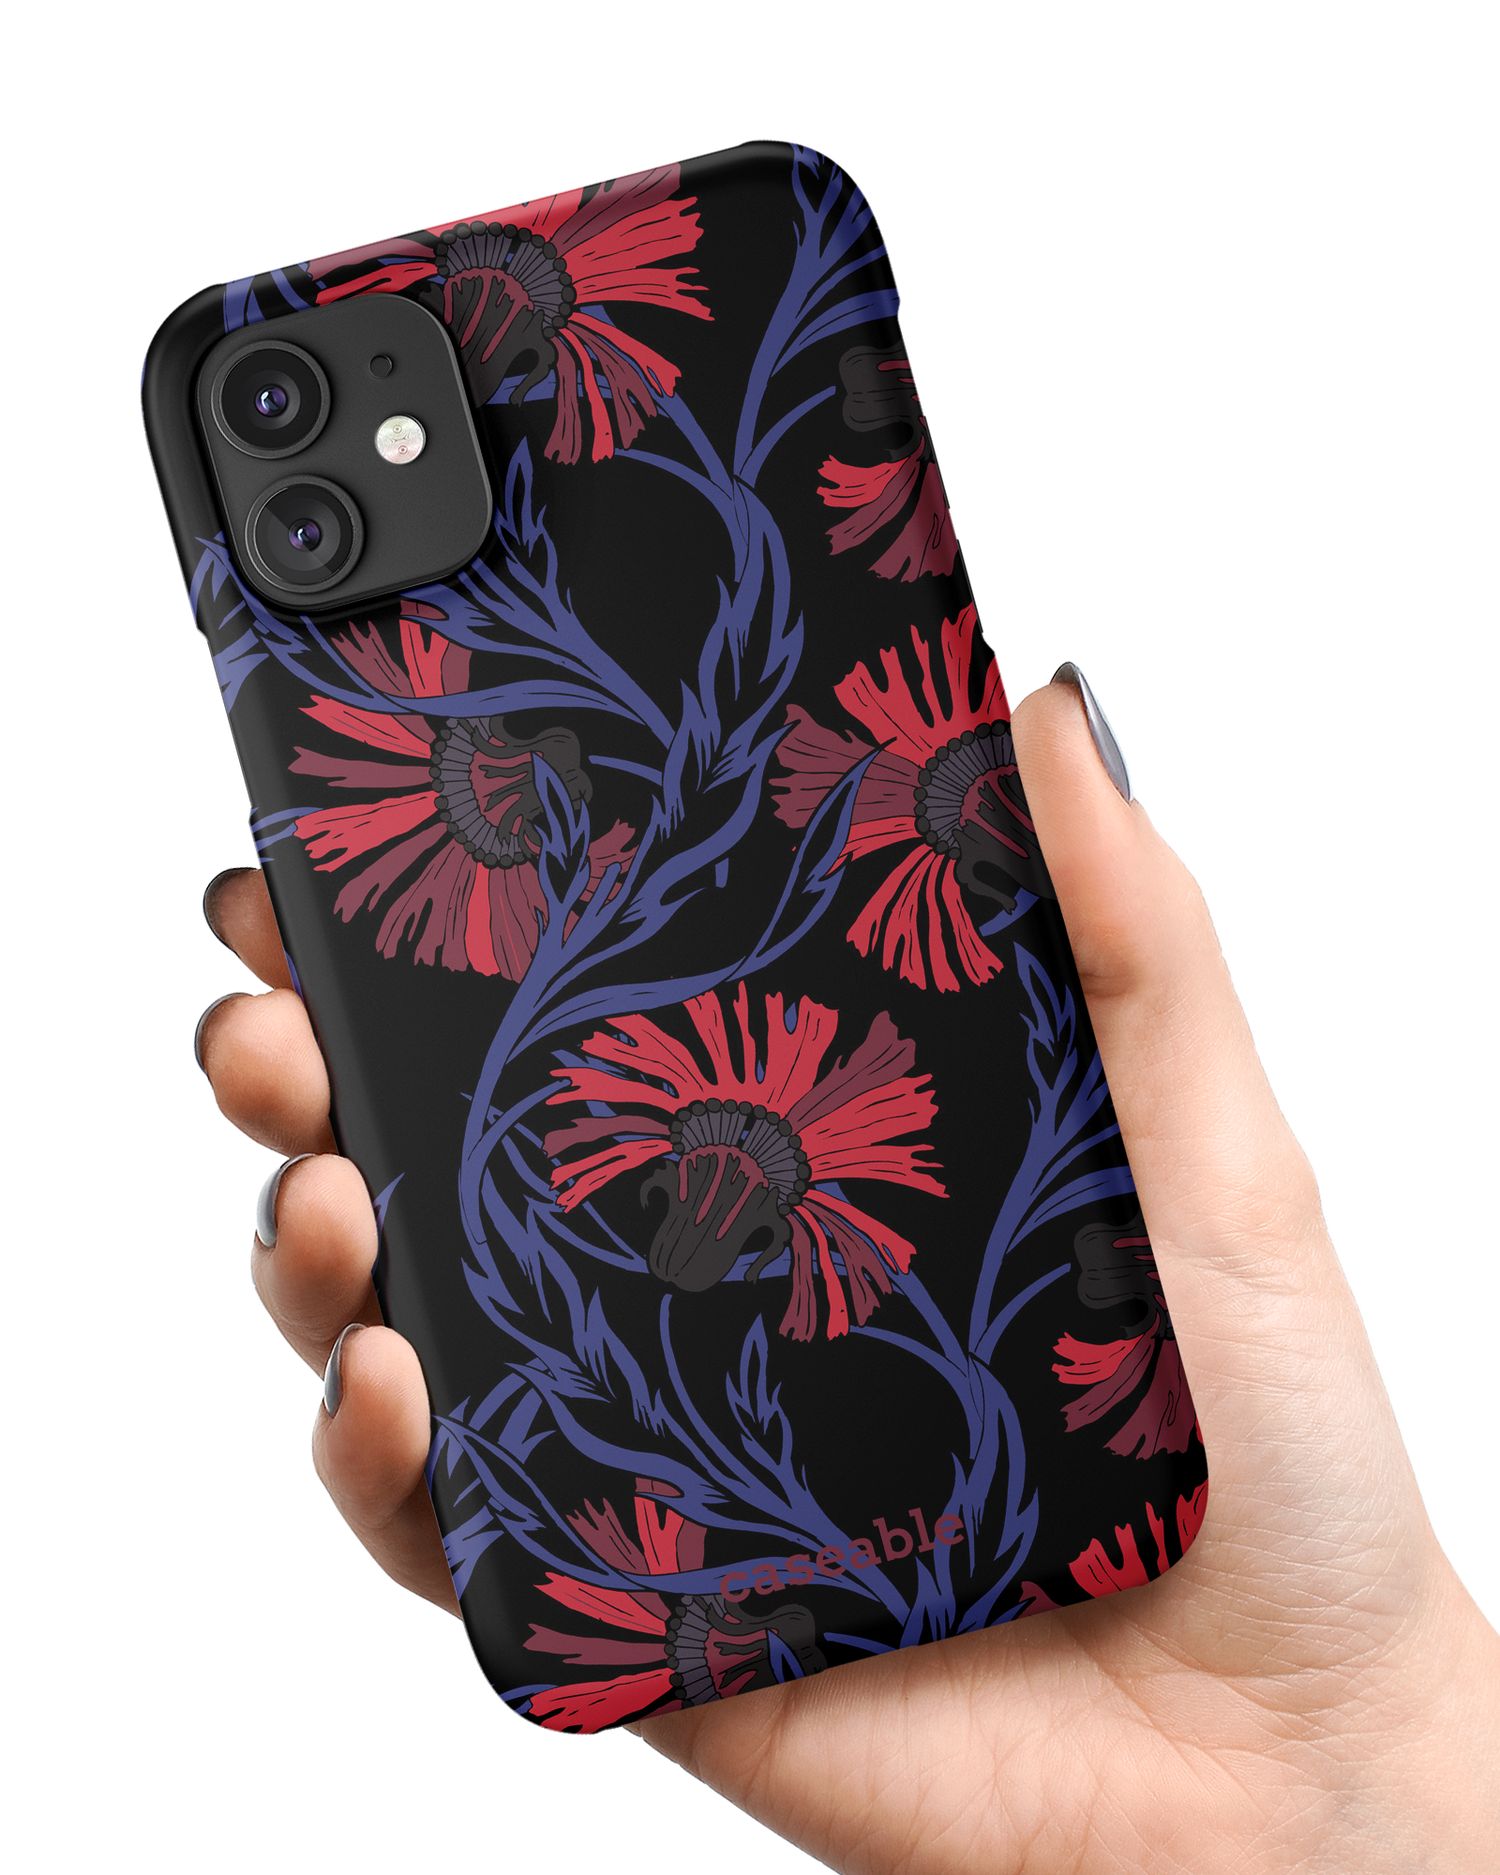 Midnight Floral Hard Shell Phone Case Apple iPhone 11 held in hand